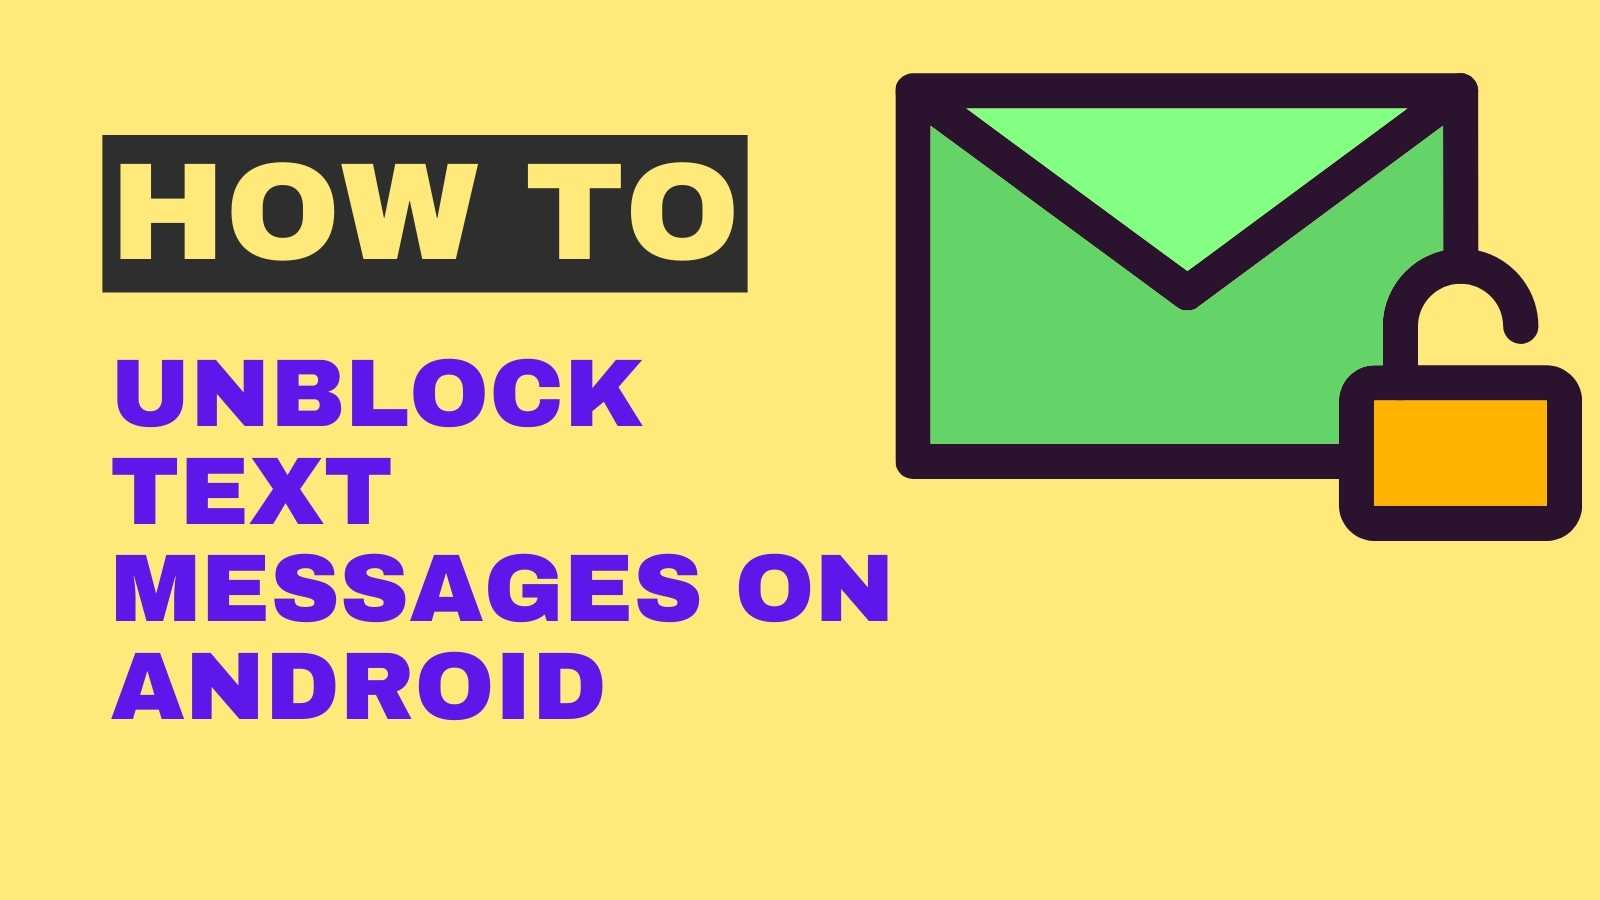 How to Unblock Text Messages on Android